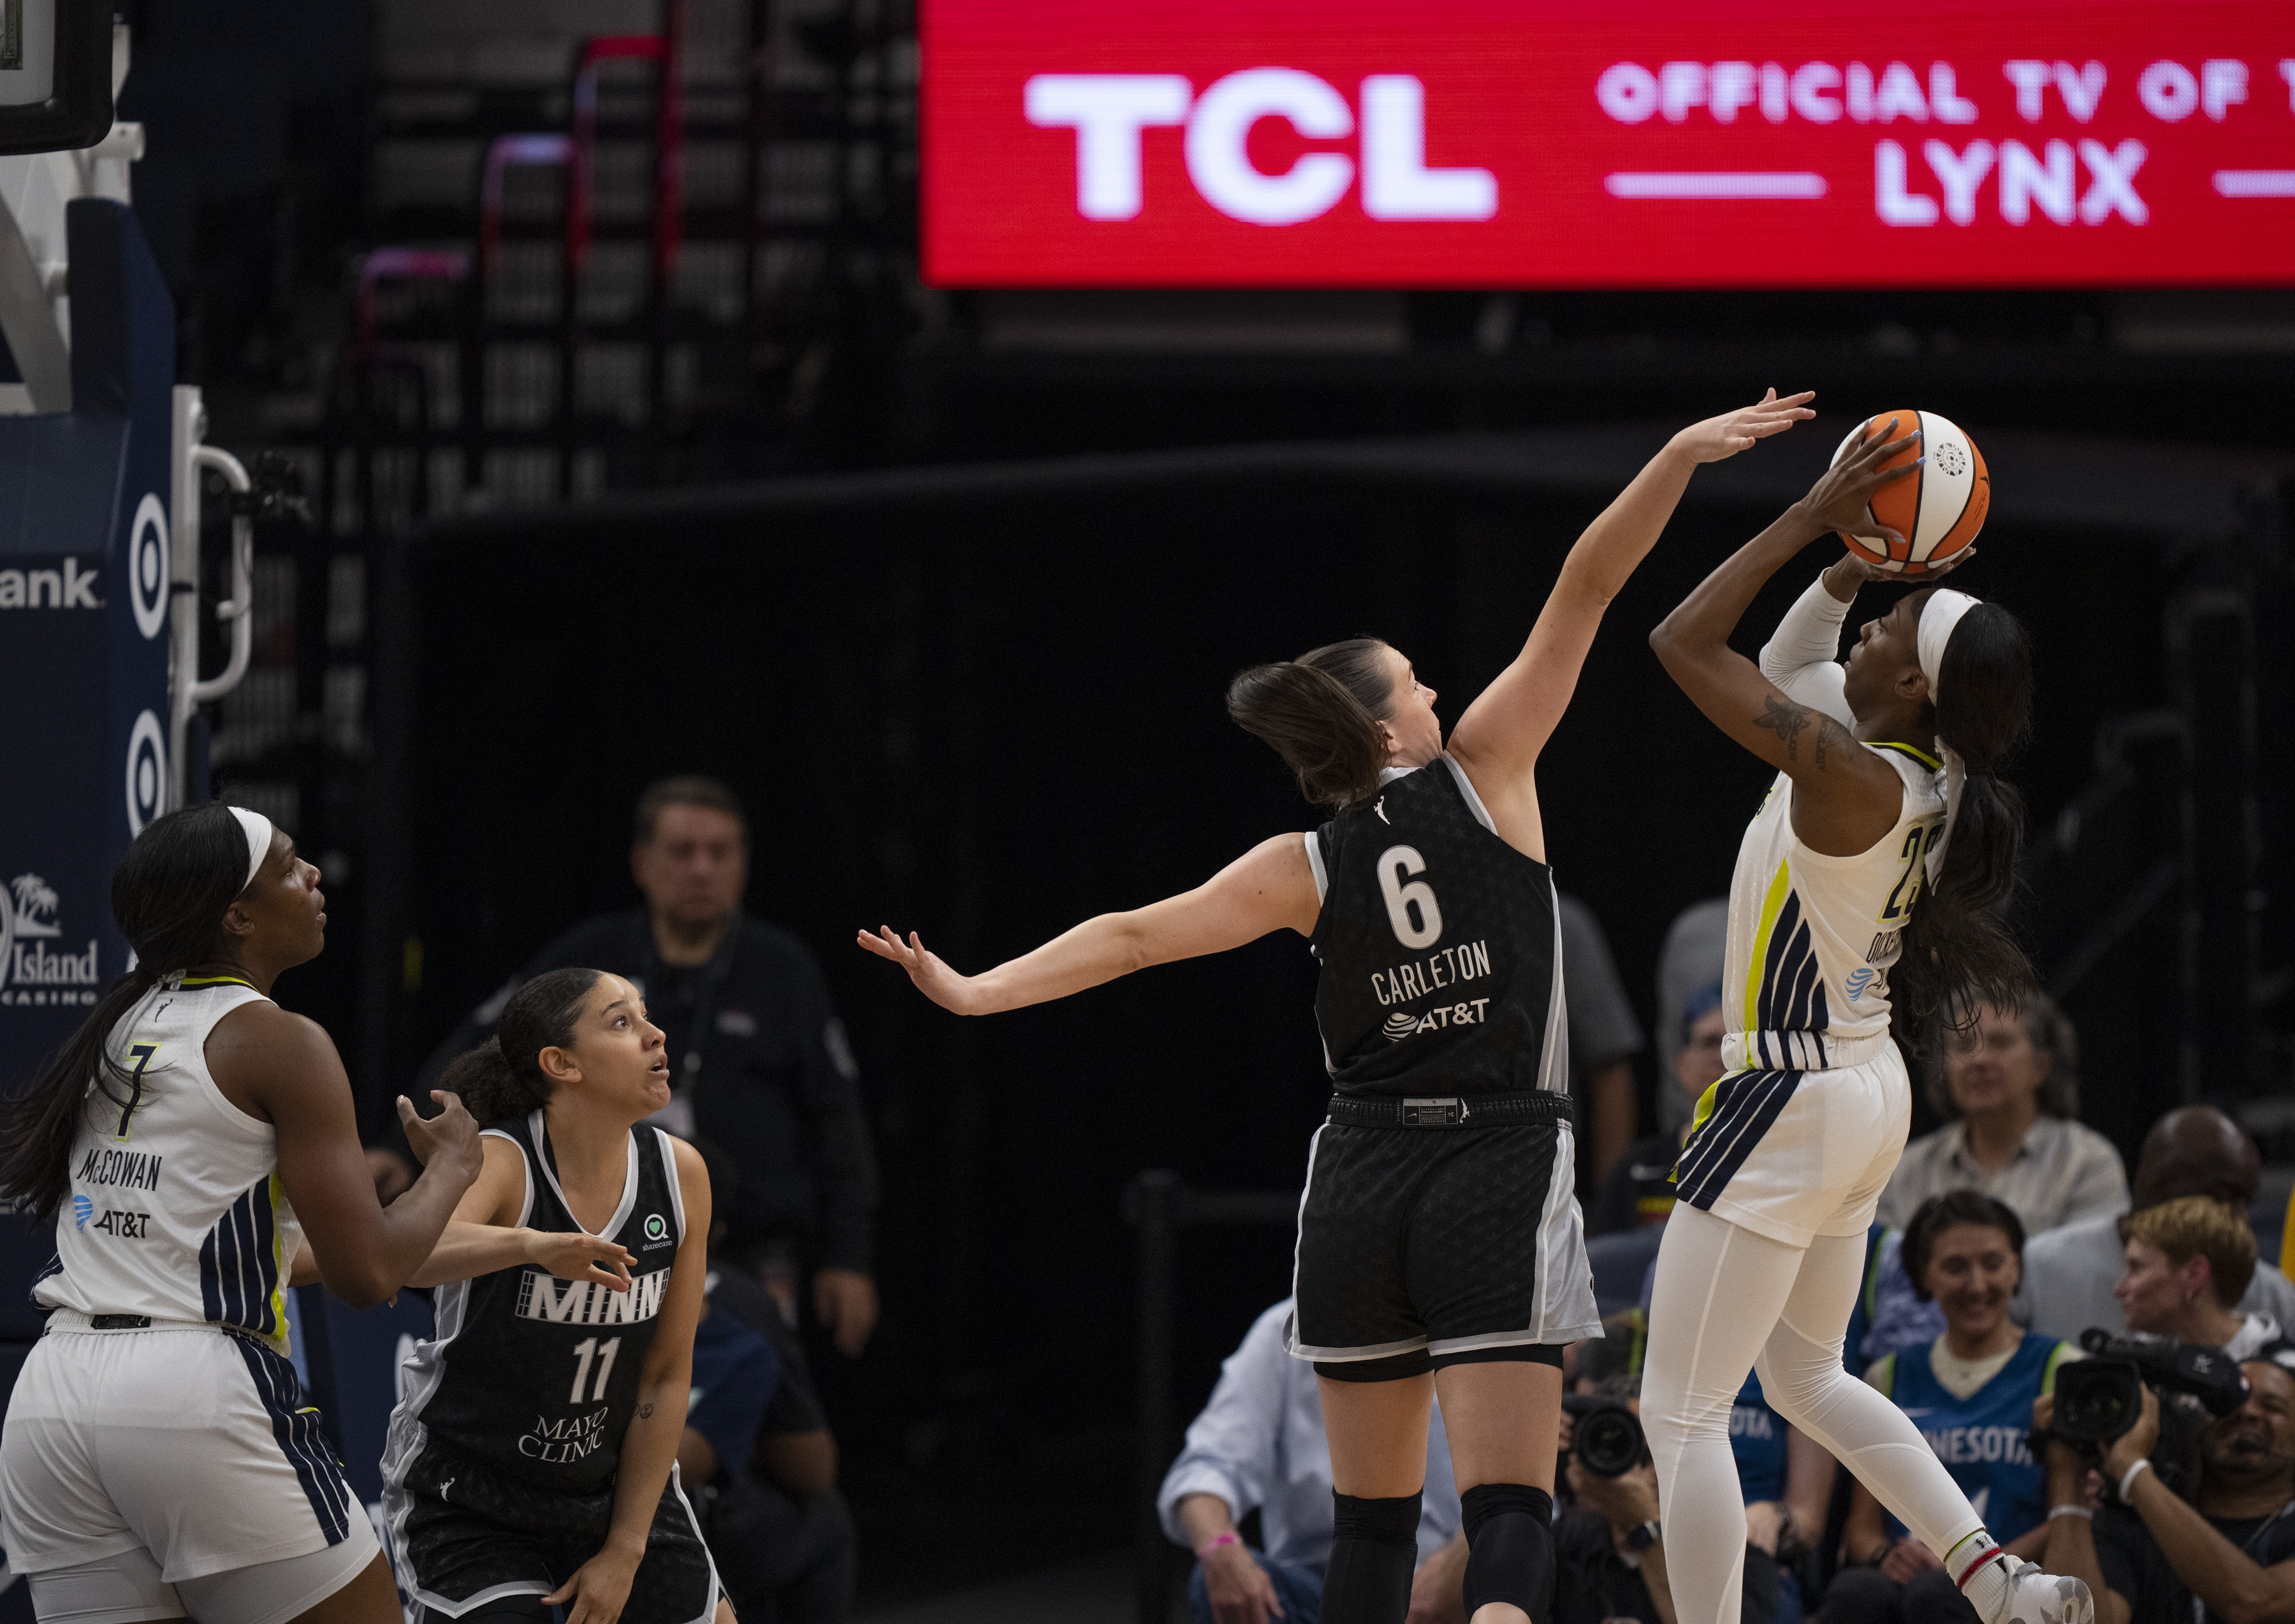 As eyes expansion, Lynx guard Carleton headed for homecoming in Toronto